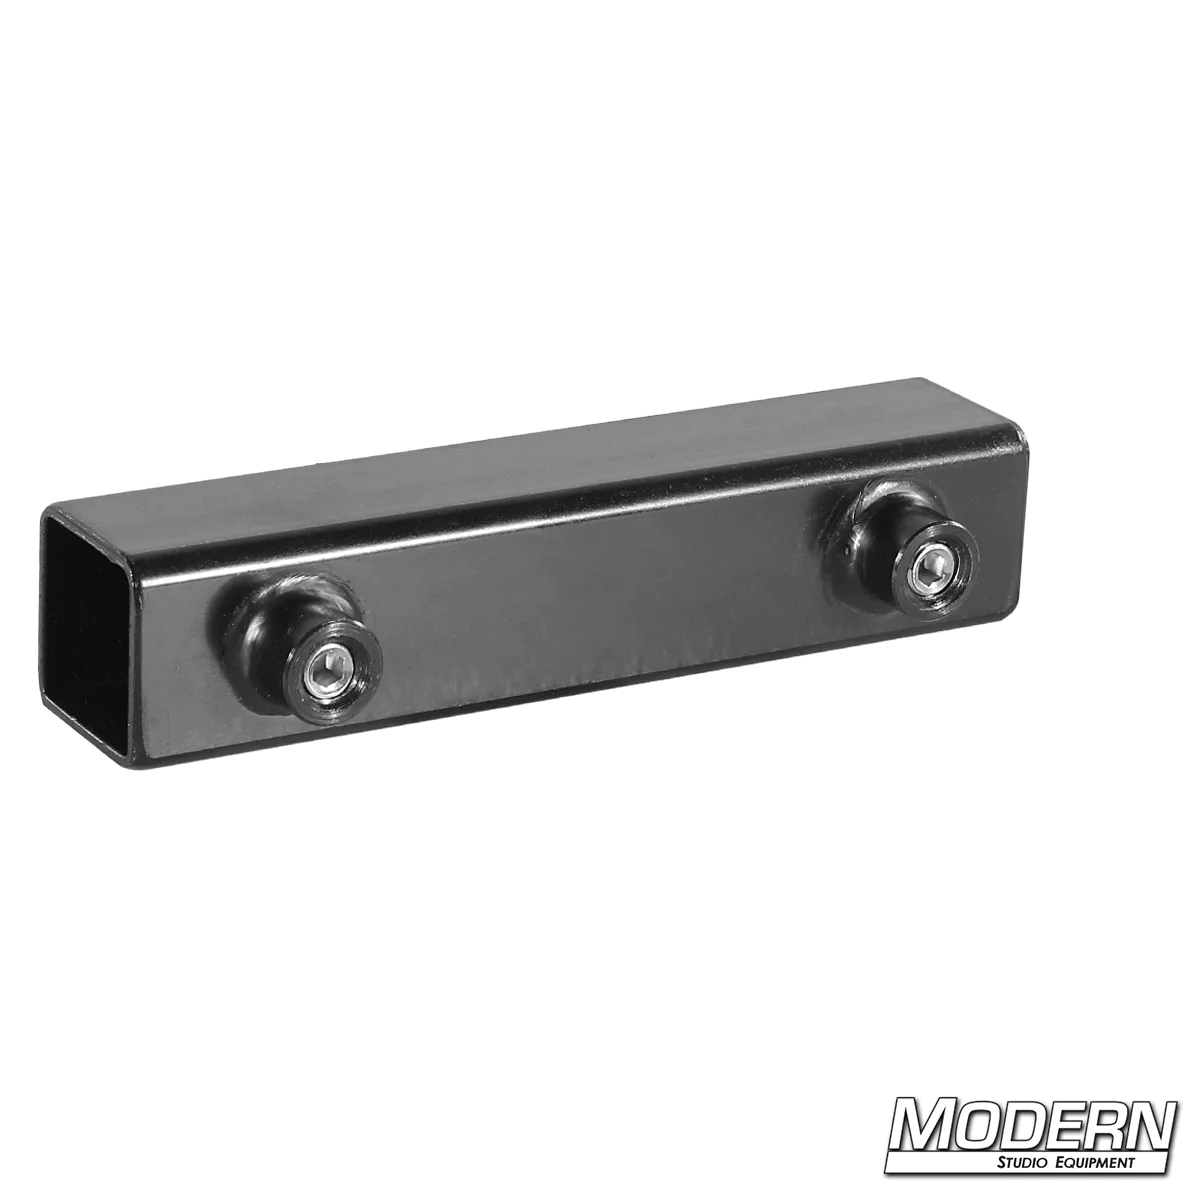 Sleeve for 1-inch Square Tube - Black Zinc with Set Screws